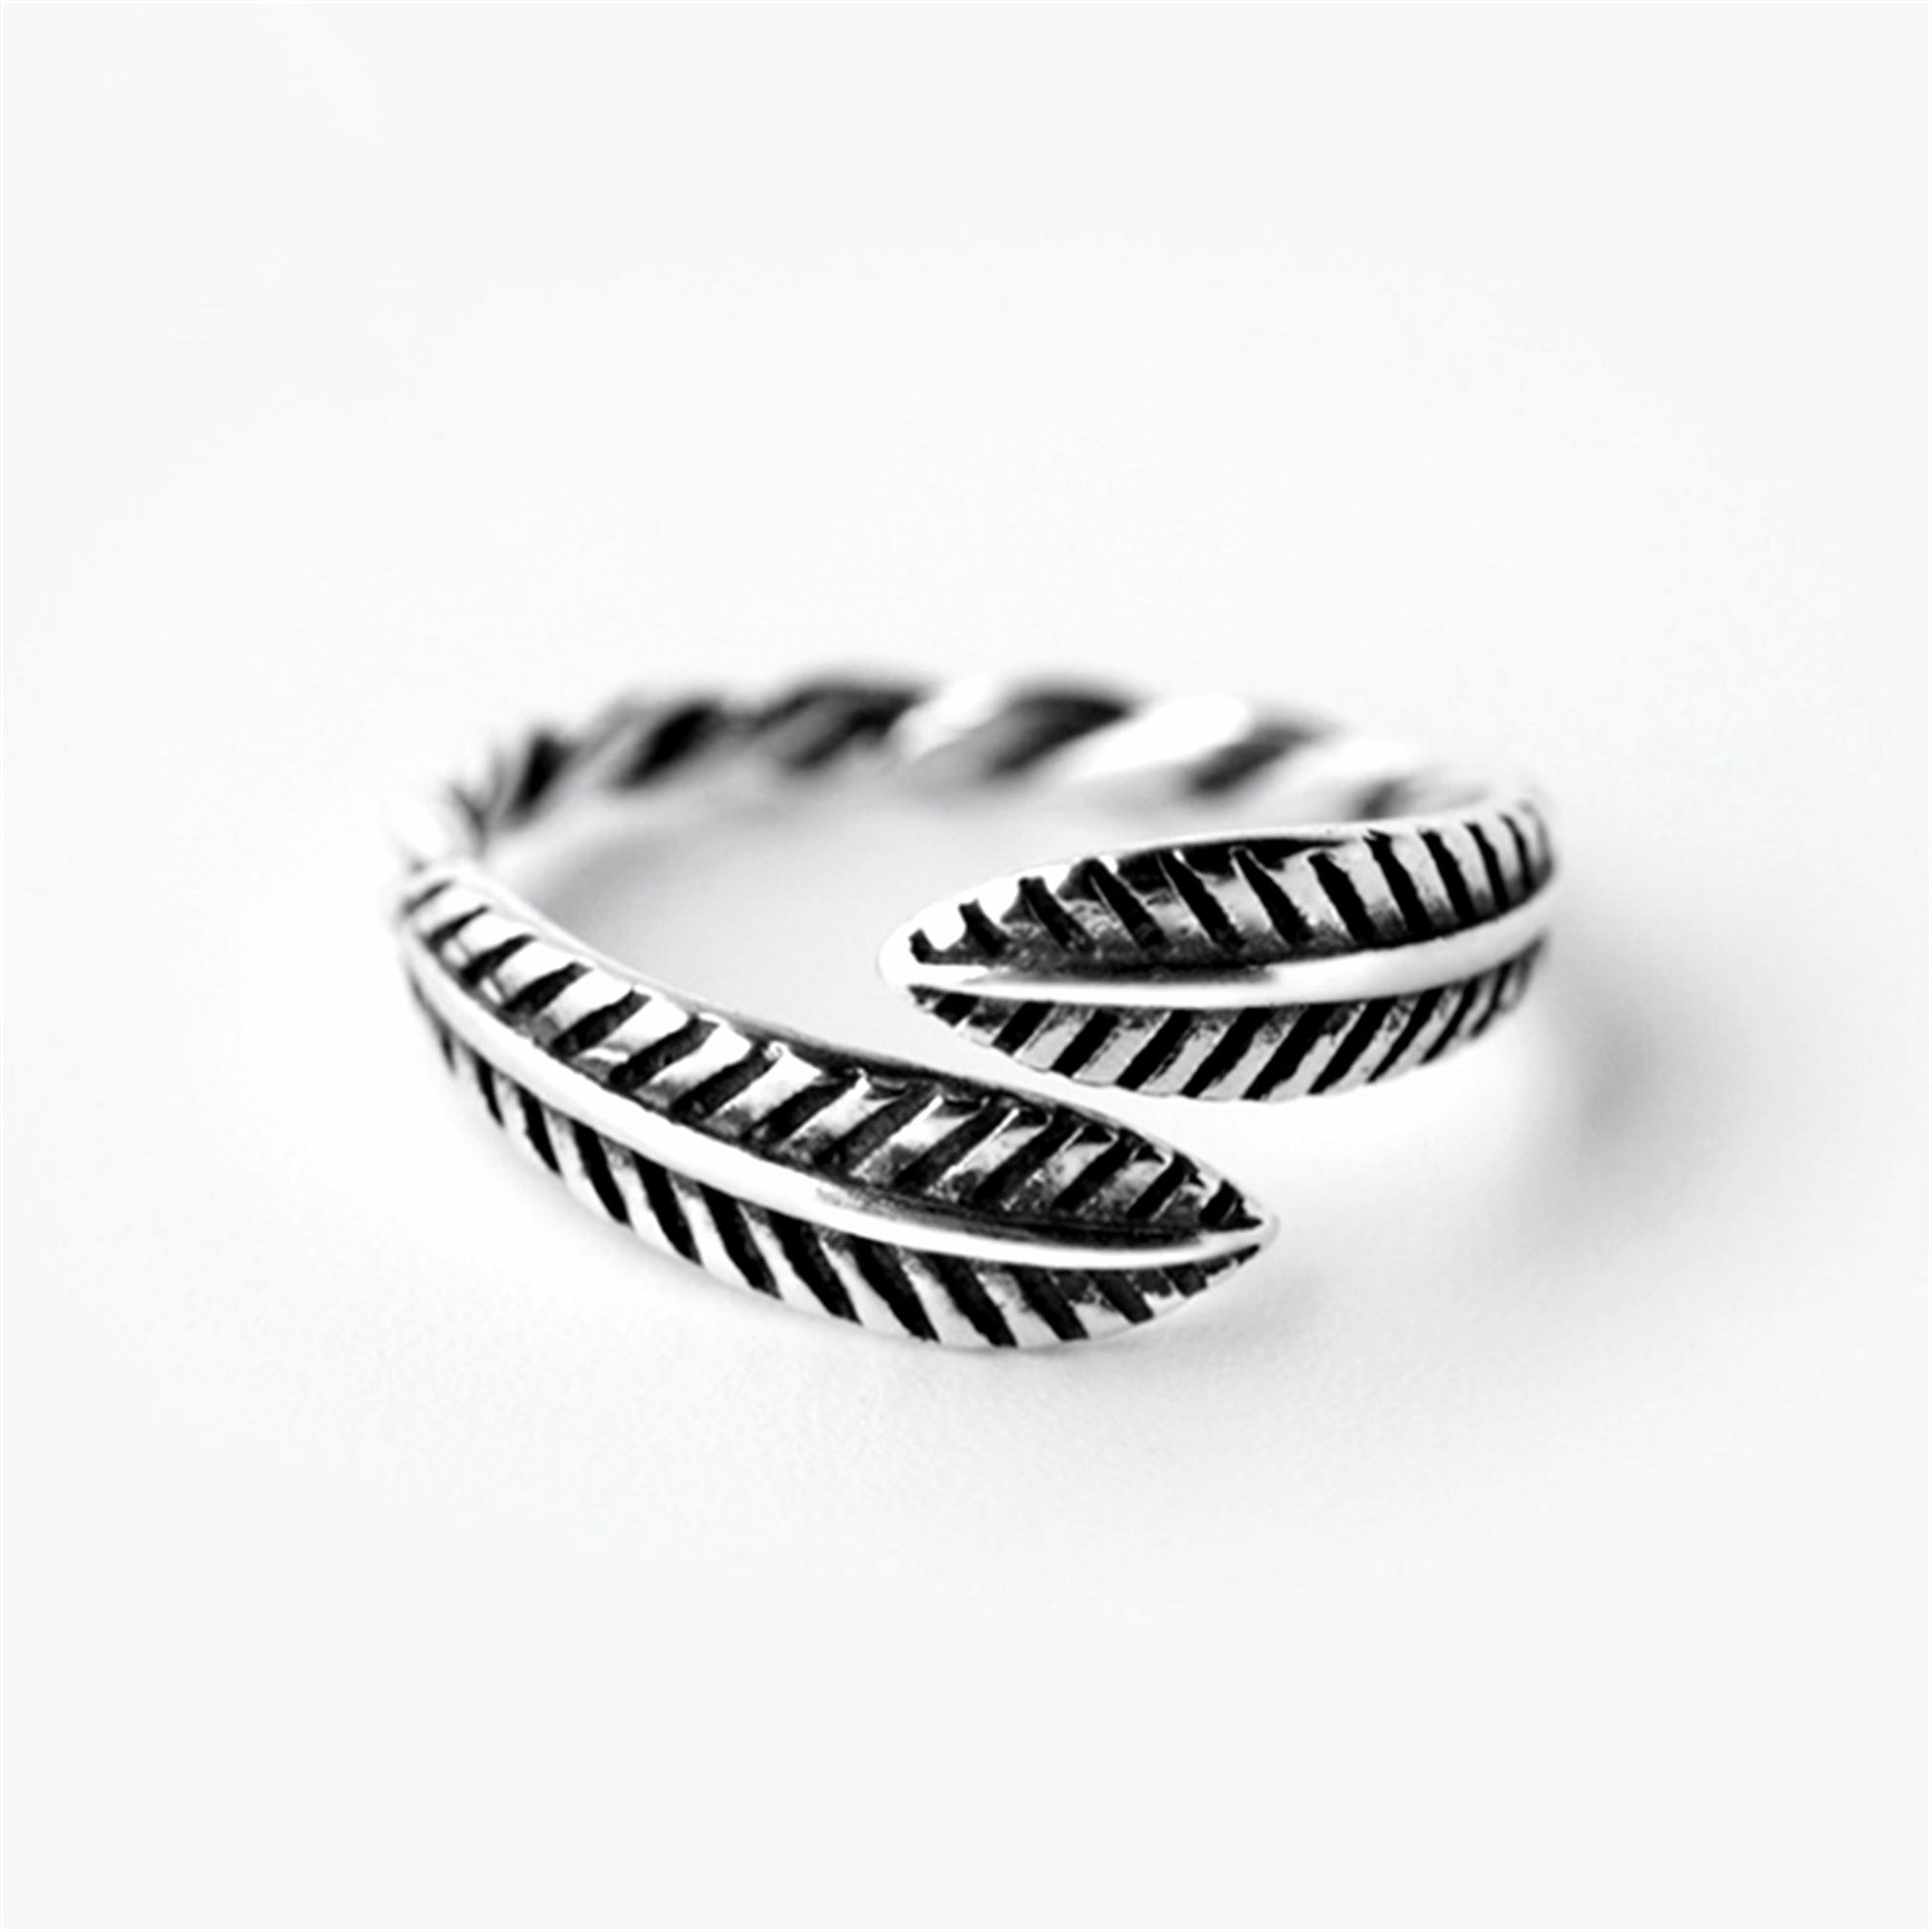 Bohemian Twisted Wire Sterling Silver Leaf Knuckle Stacking Ring - sugarkittenlondon